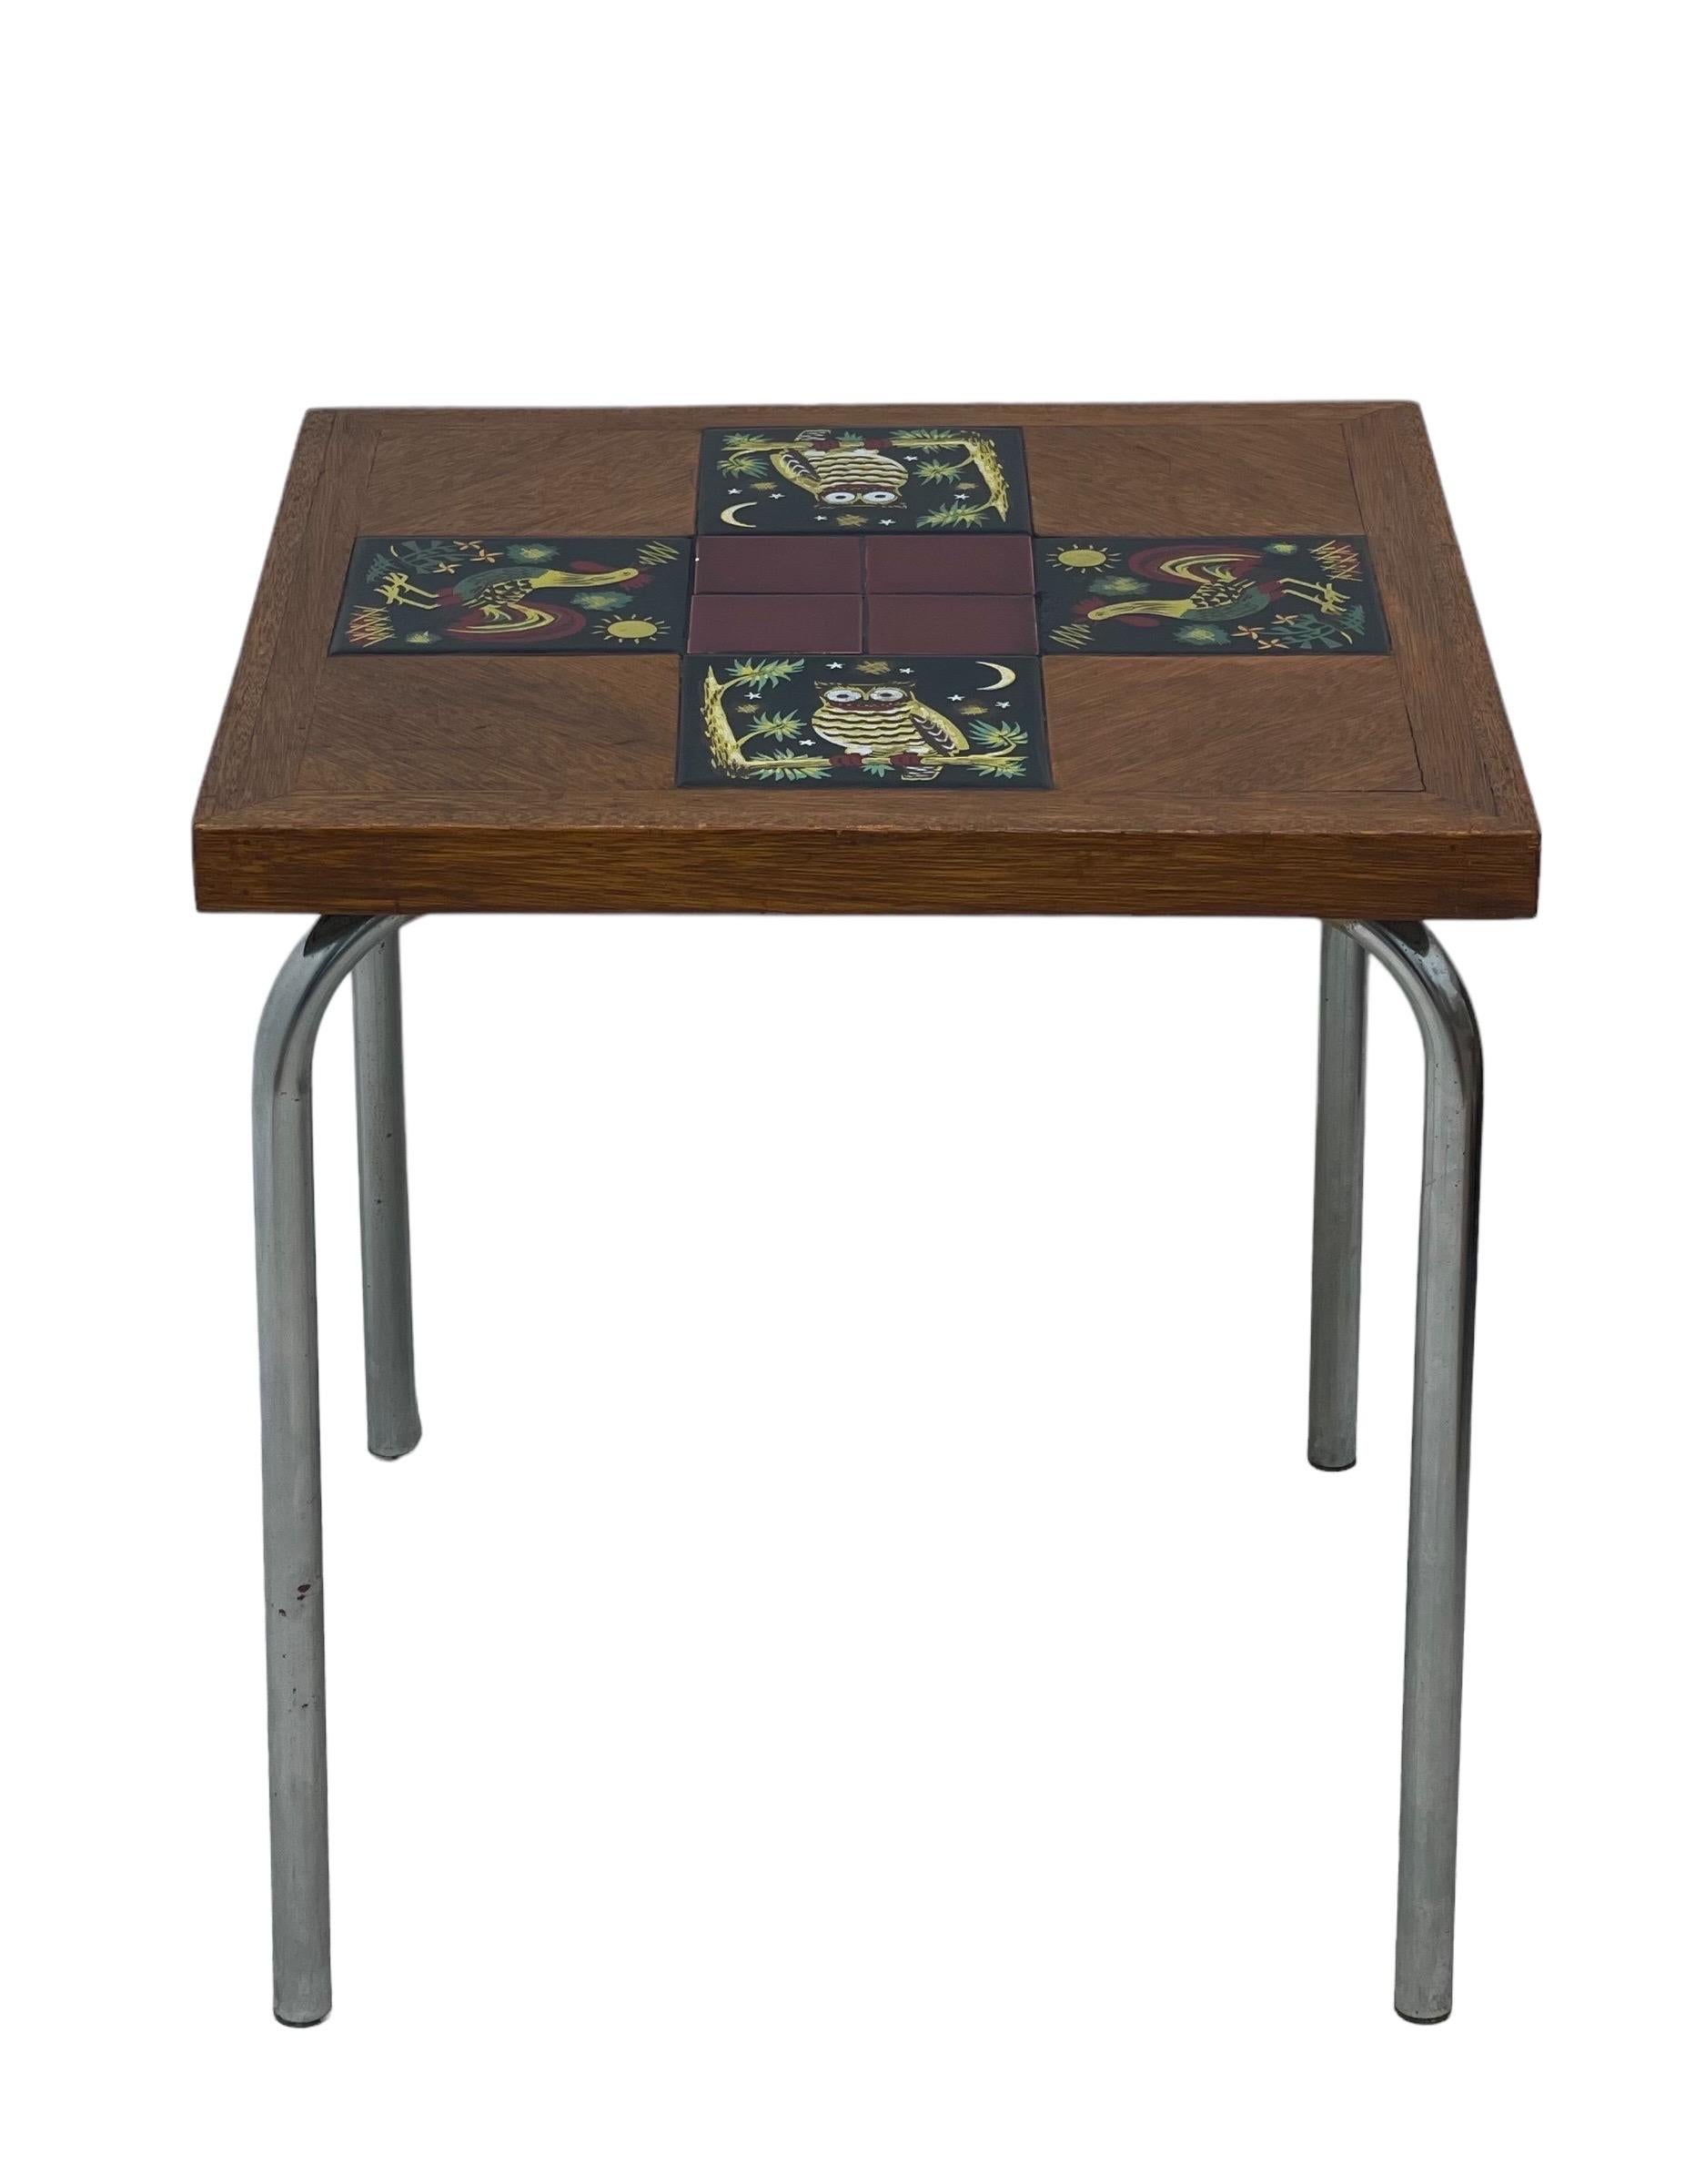 Vintage Mid Century Tile Top End Table or Accent Stand
 In Good Condition For Sale In Seattle, WA